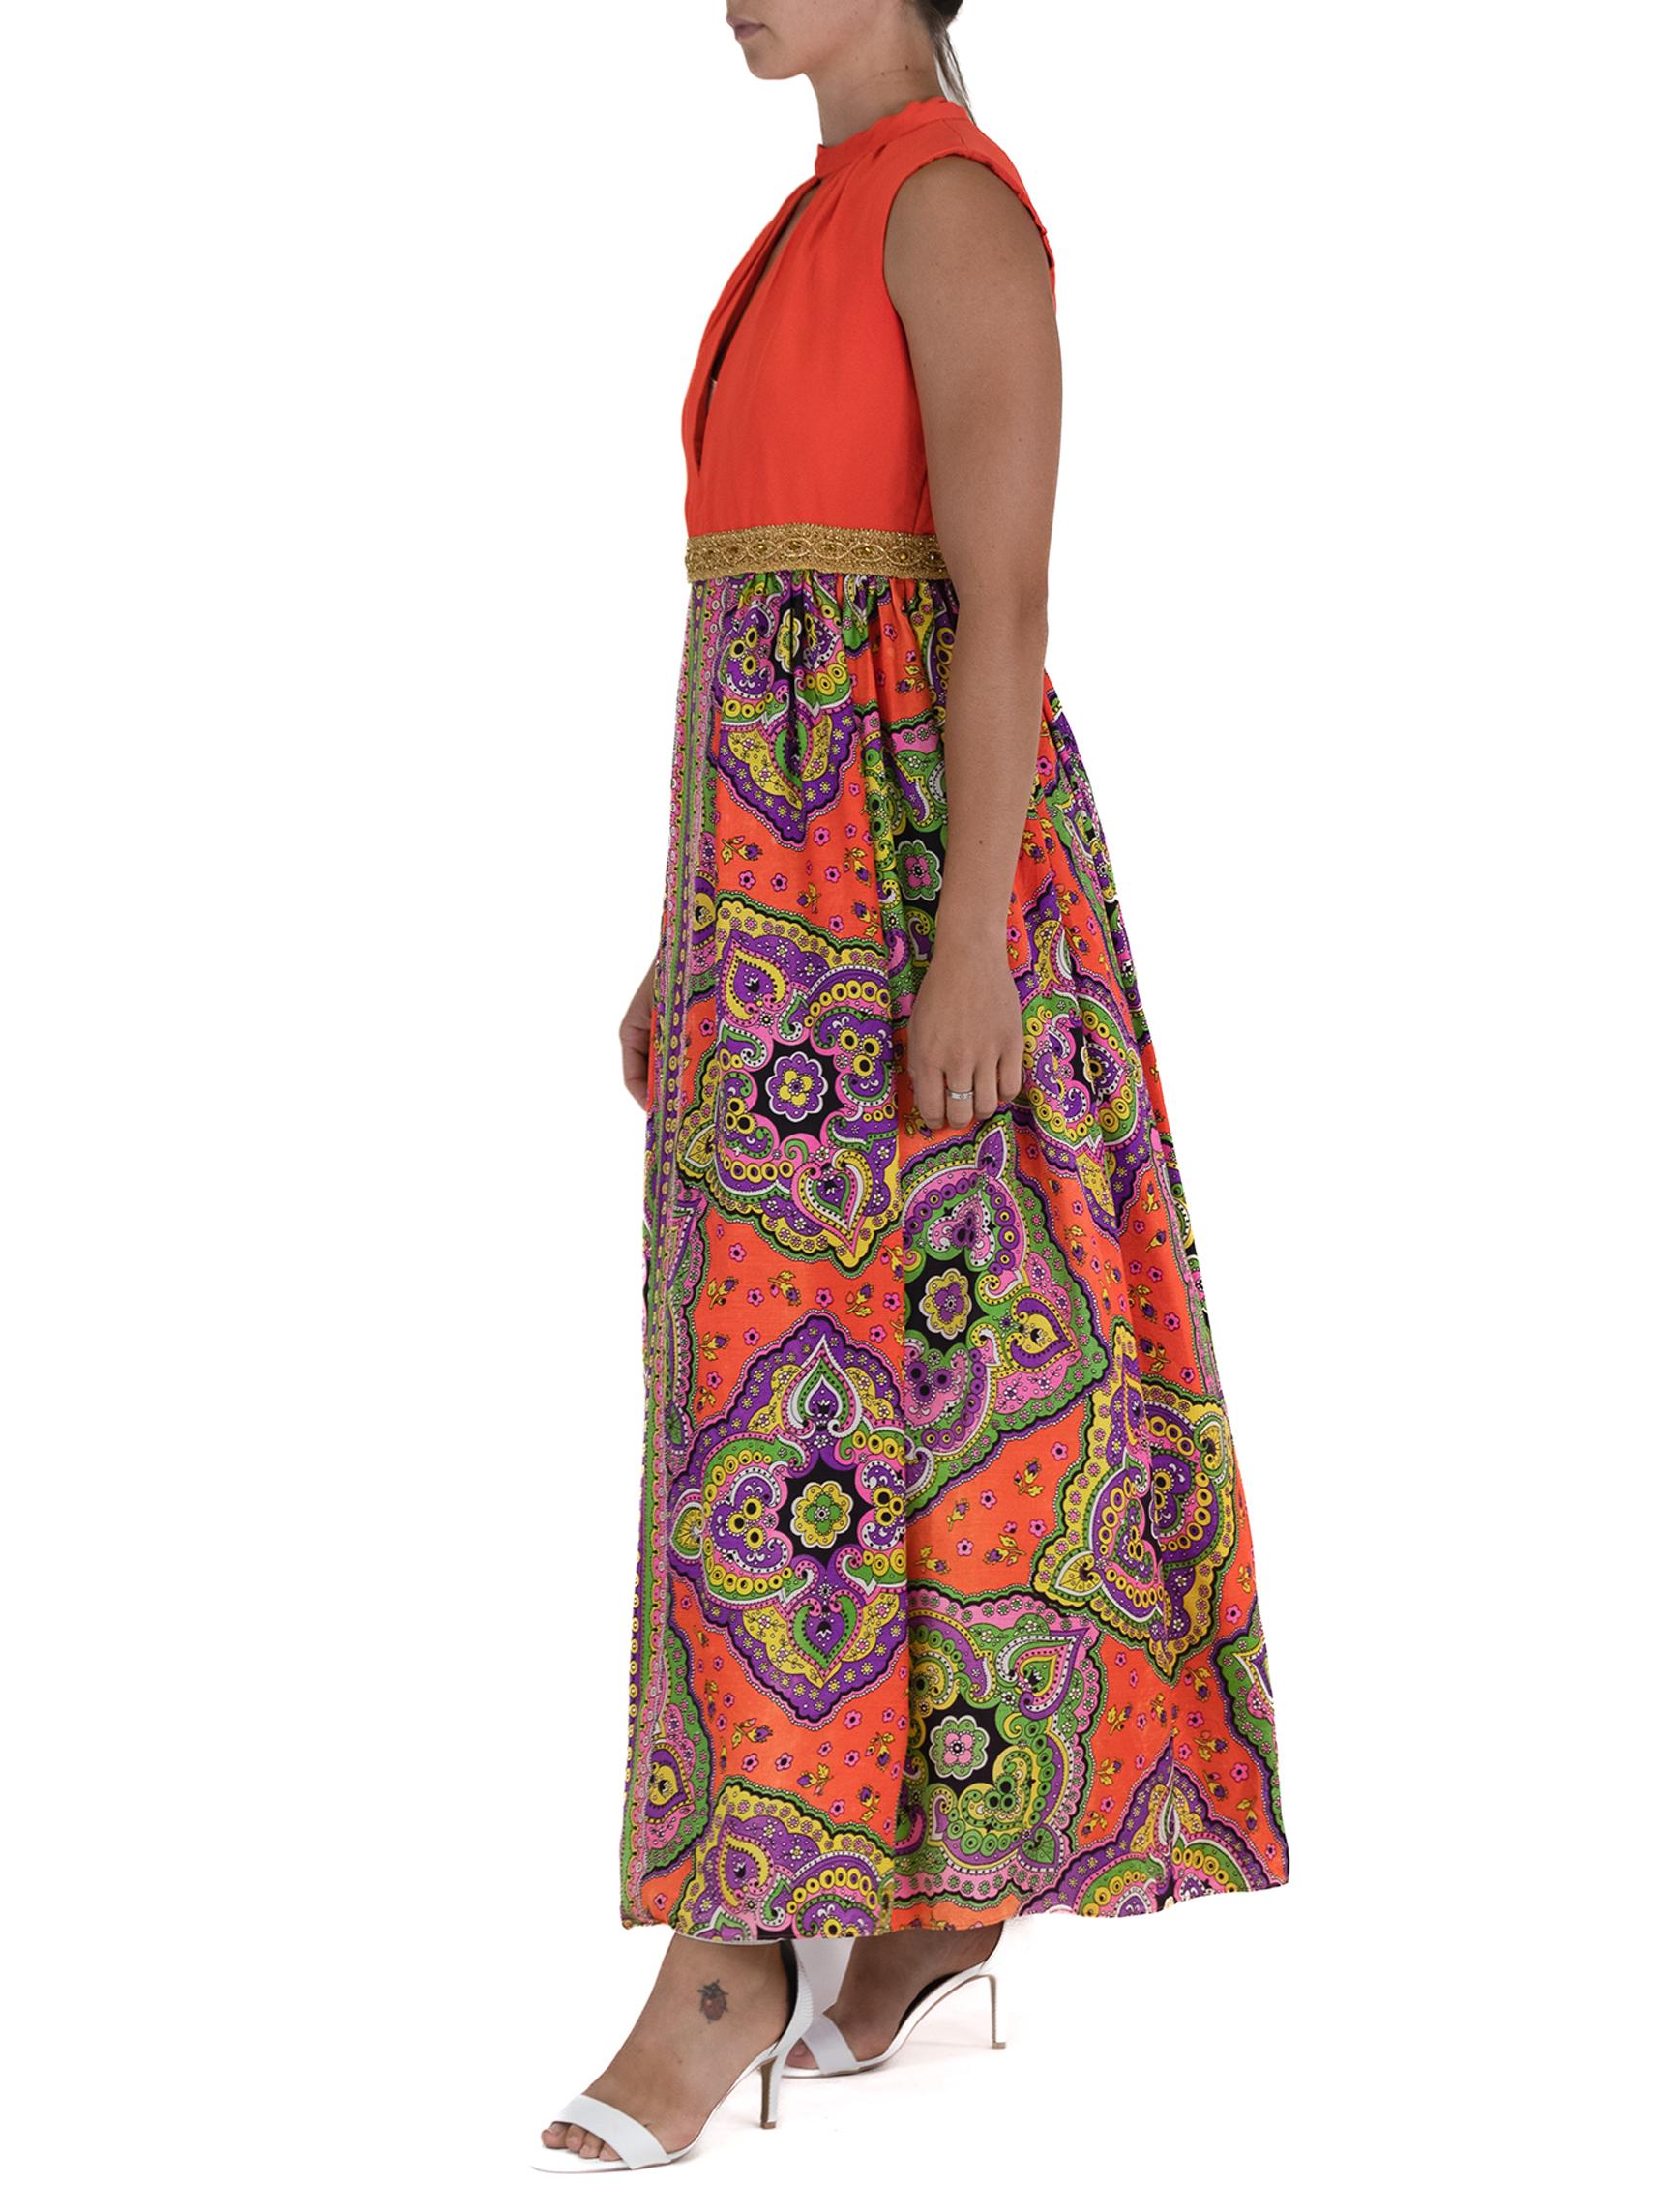 1970S Orange Psychedelic Paisley Print Dress With Keyhole Neck And Gold Braided Embellishment